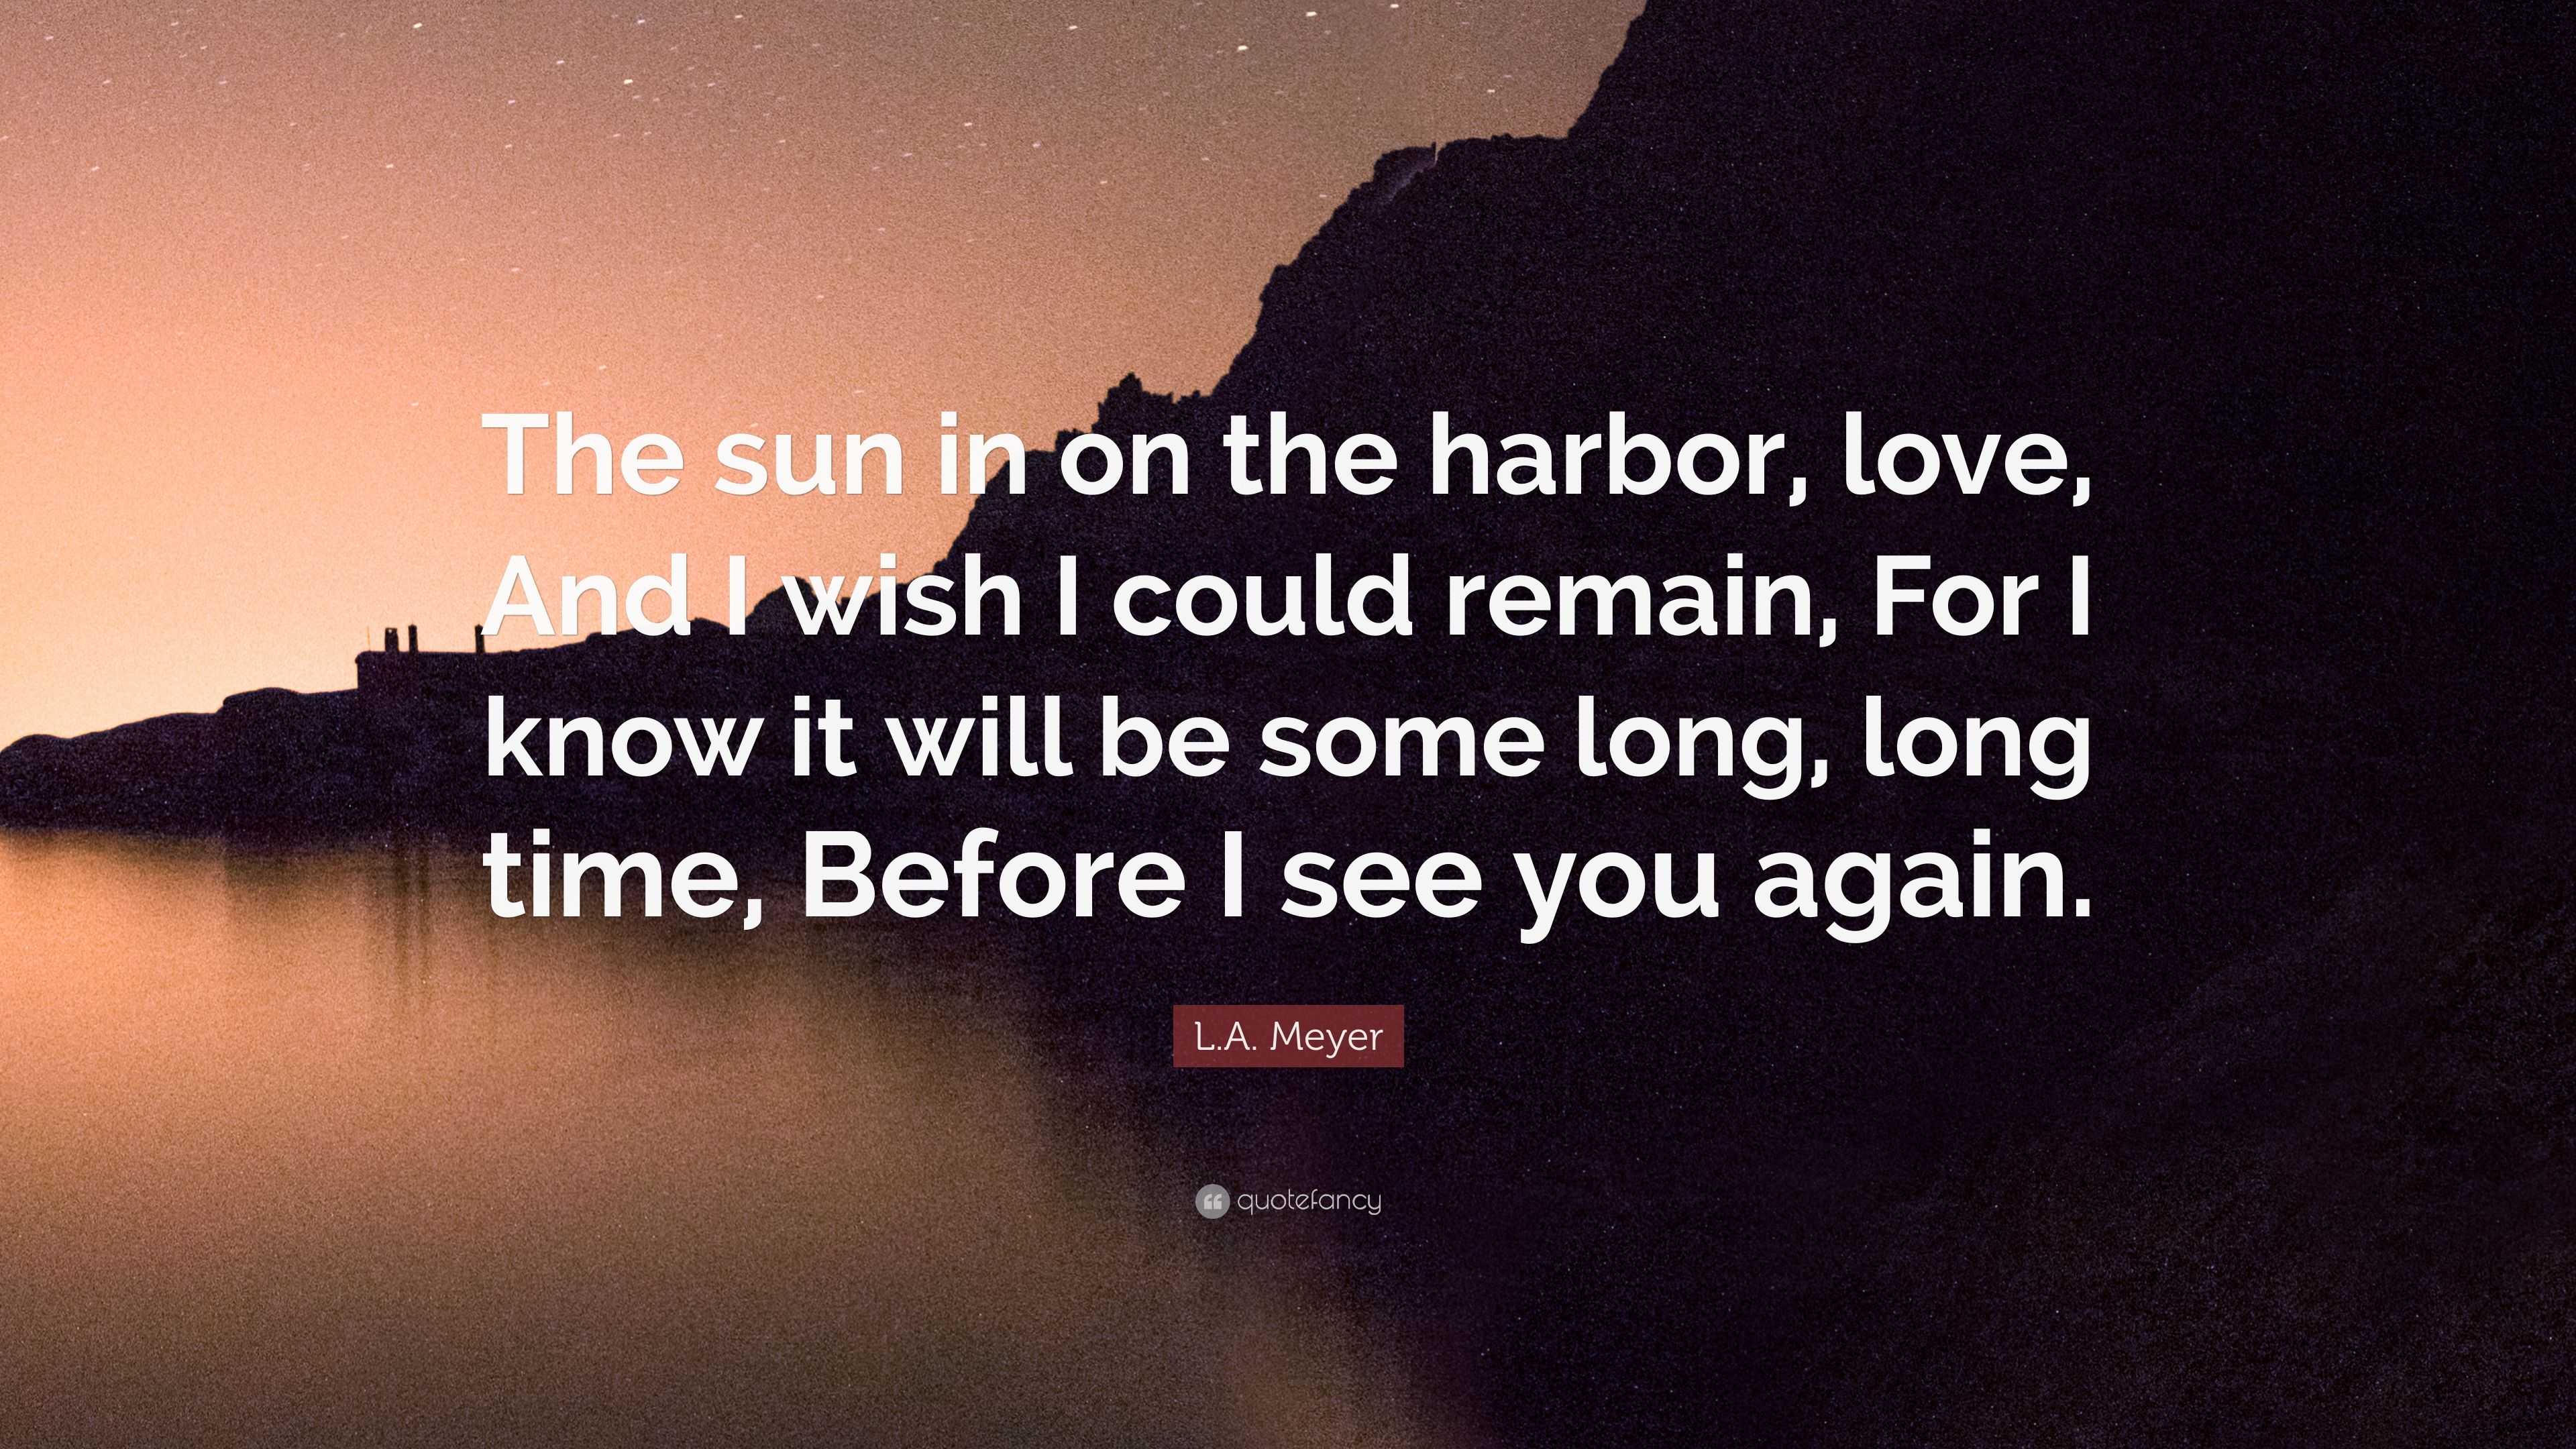 L A Meyer Quote The Sun In On The Harbor Love And I Wish I Could Remain For I Know It Will Be Some Long Long Time Before I See You 7